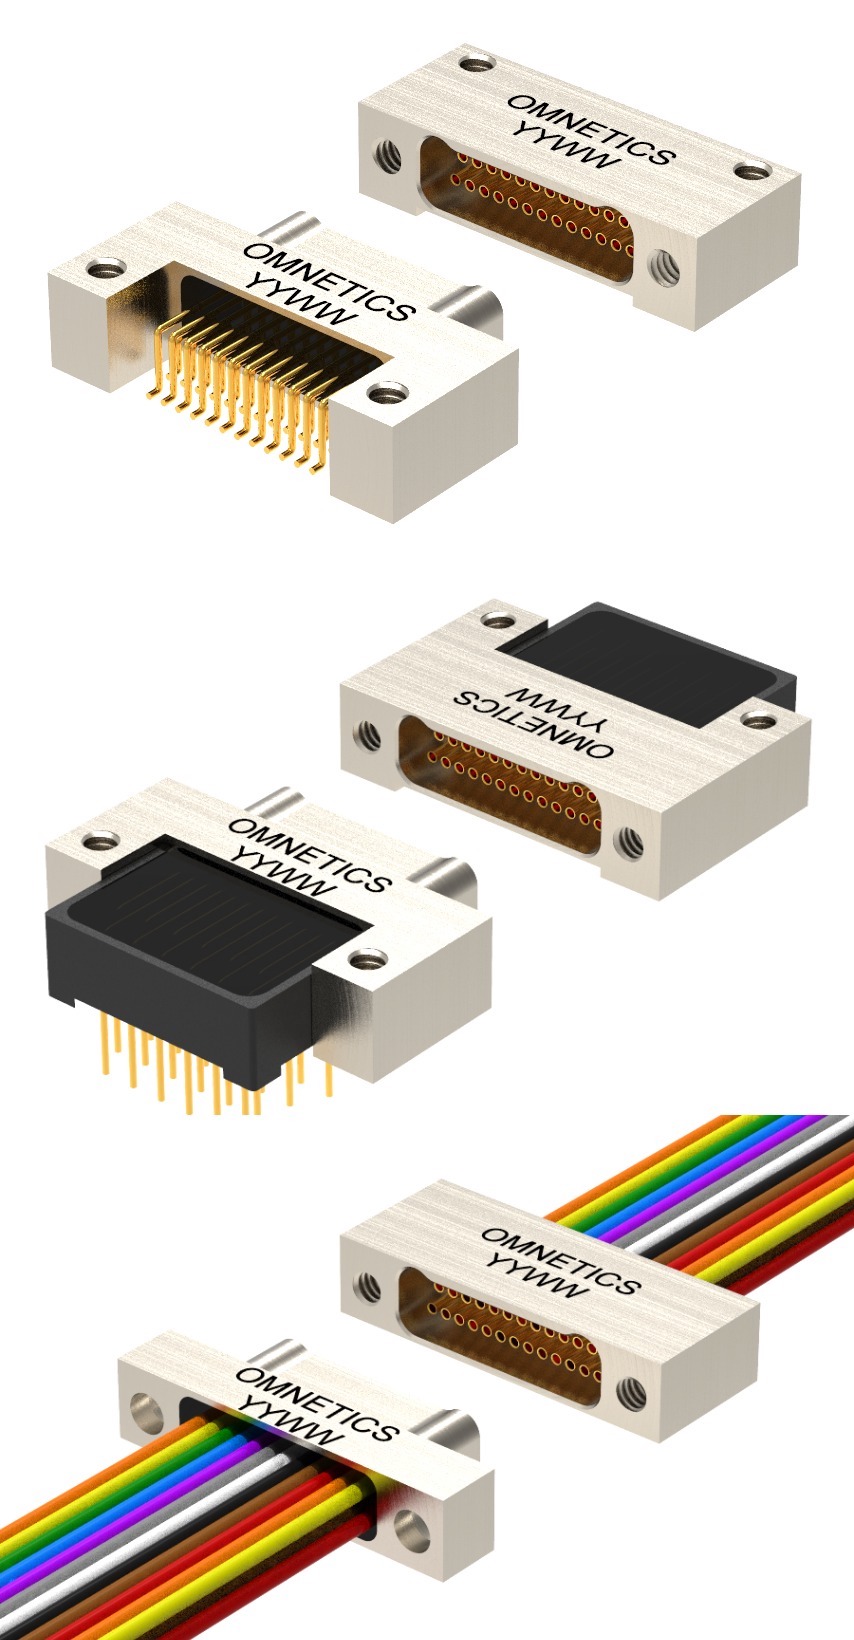 Micro- and Nano-Pitch Rectangular I/O Connectors from Omnetics